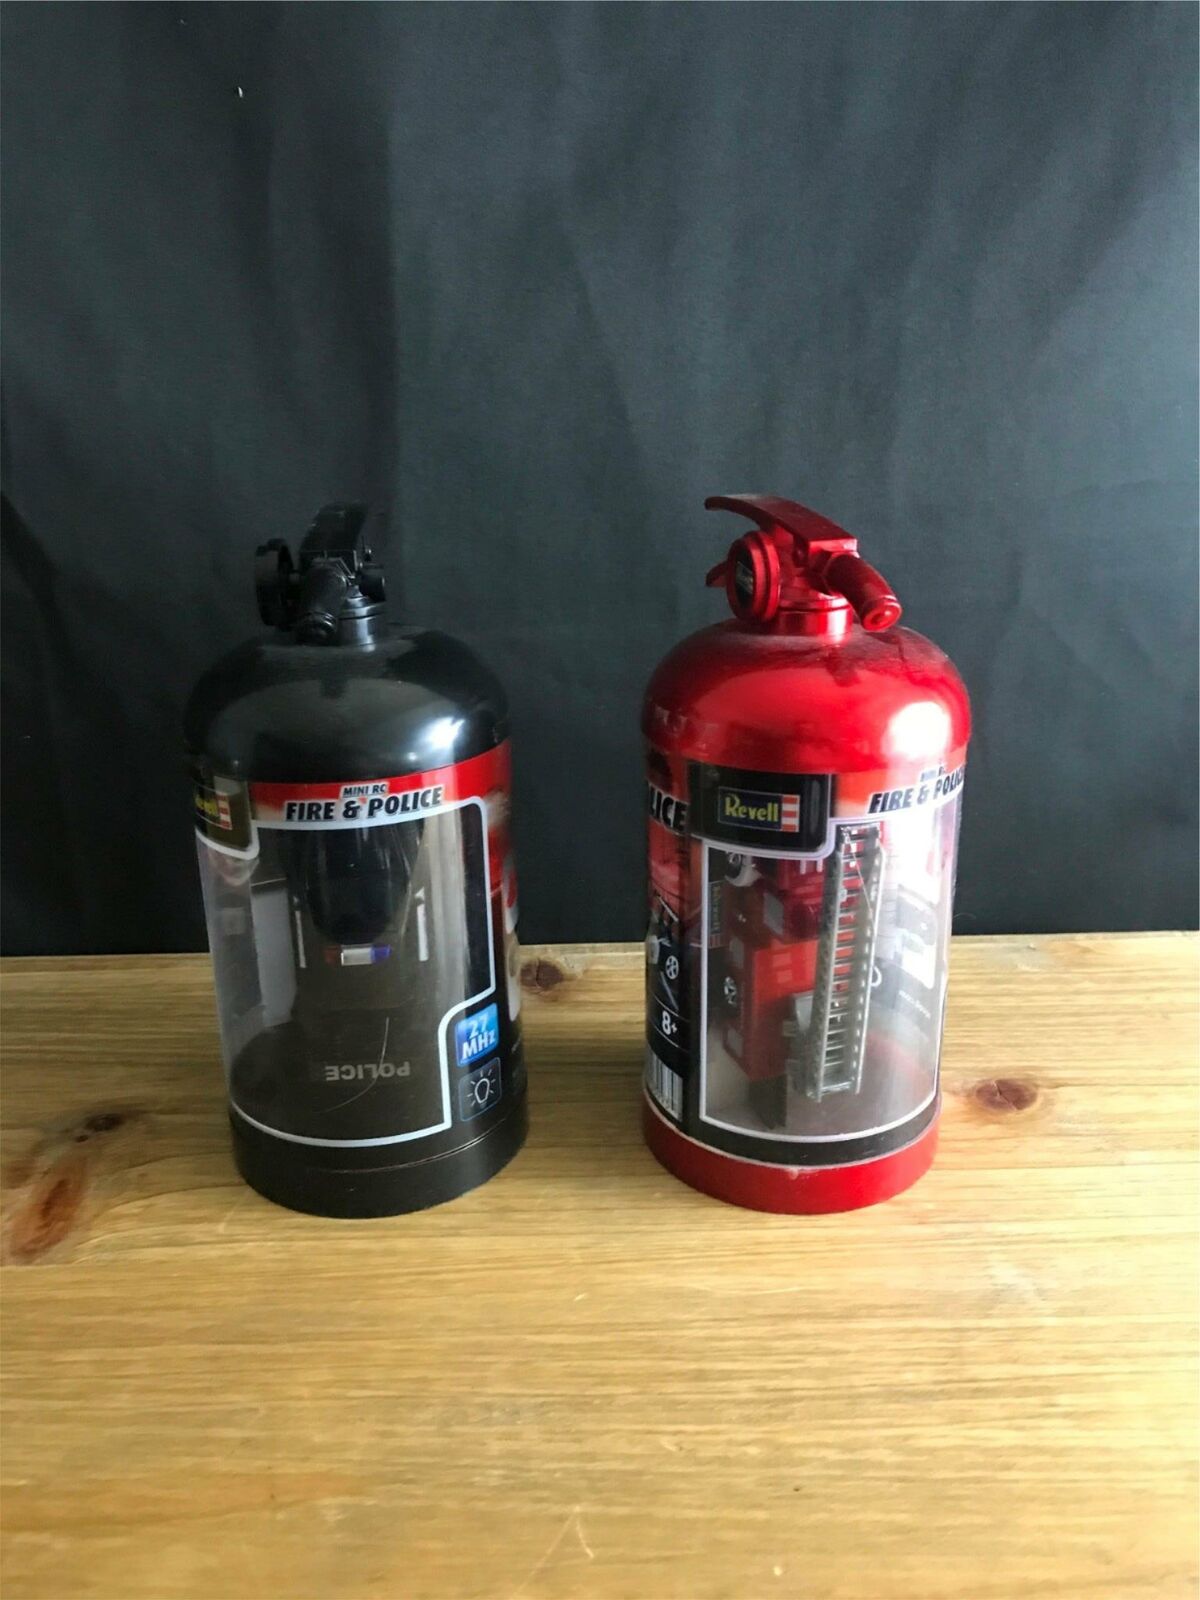 SEALED NEW 2015 REVELL MINI RC Fire And Police Car Set Fire Extinguisher Bottle